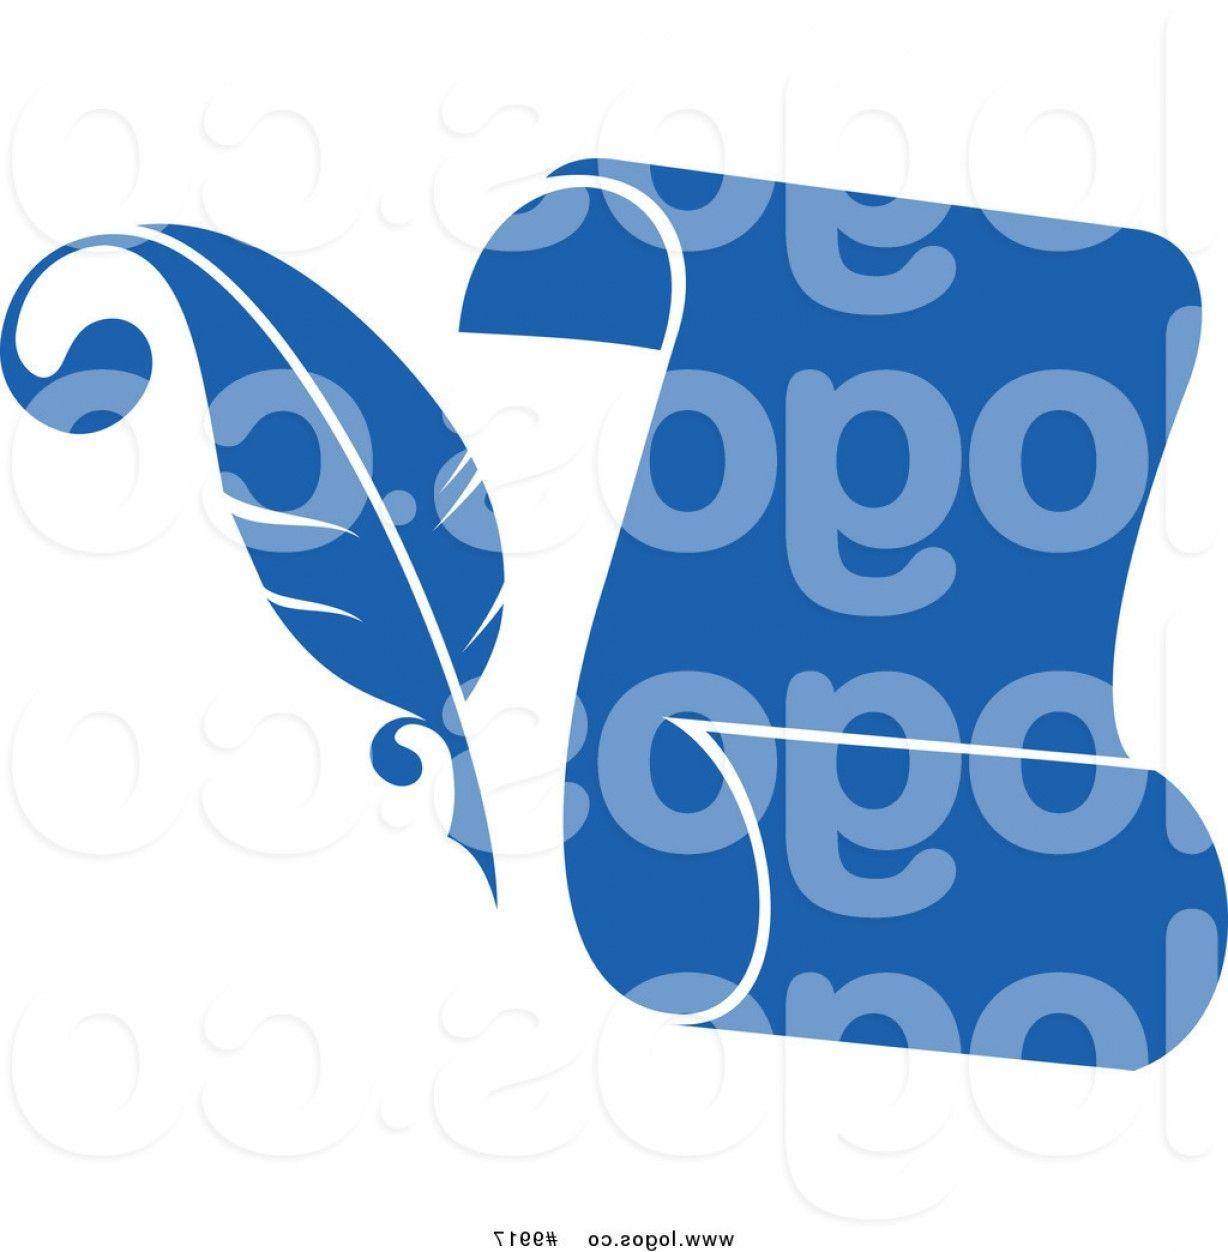 Quill Scroll Logo - Royalty Free Clip Art Vector Logo Of A Blue Feather Quill Pen